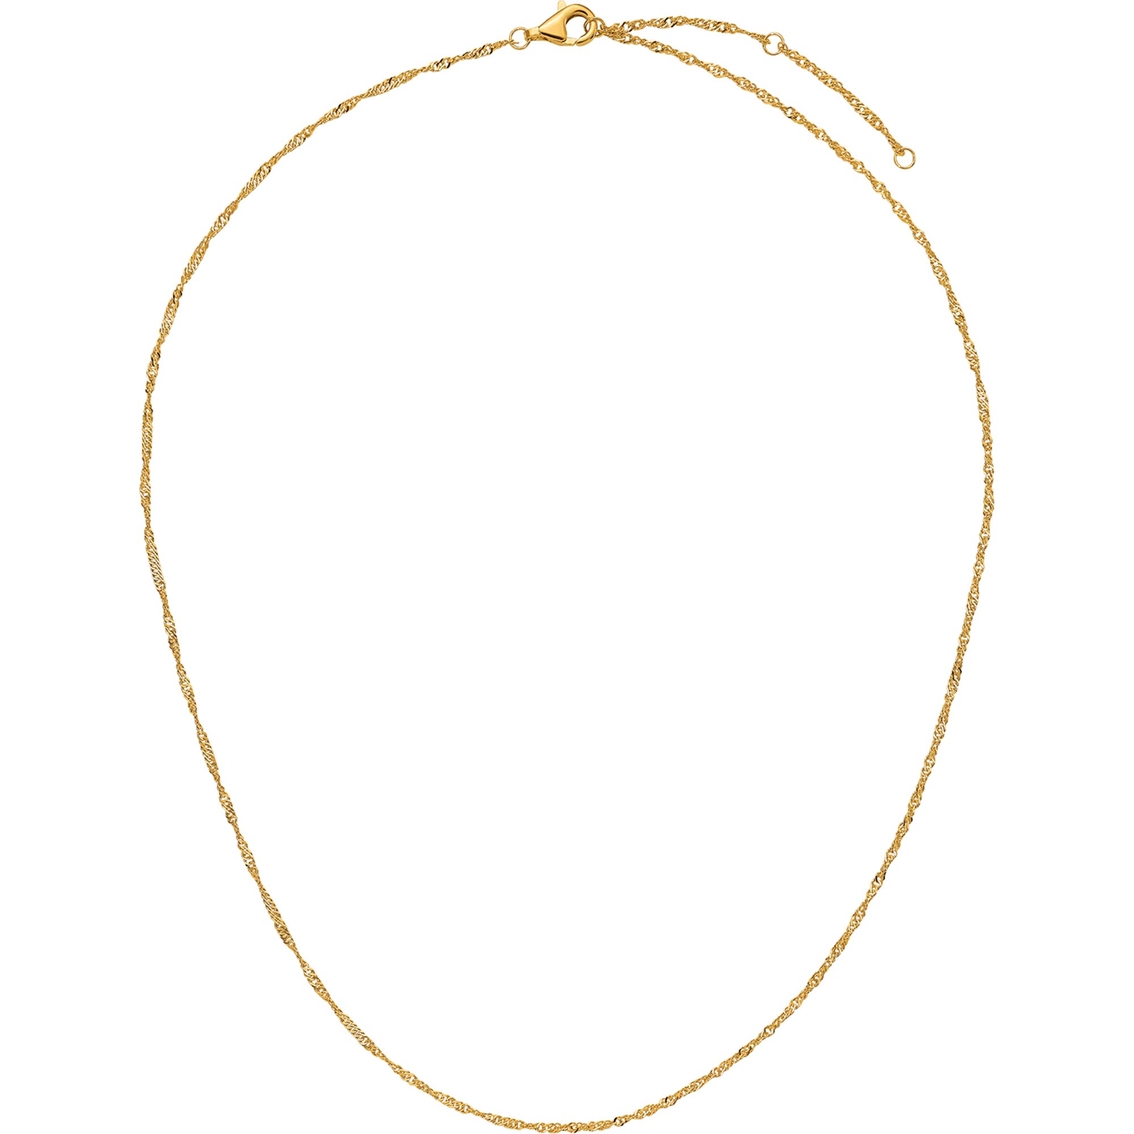 24K Pure Gold 1.6mm Singapore Chain Necklace - Image 2 of 7